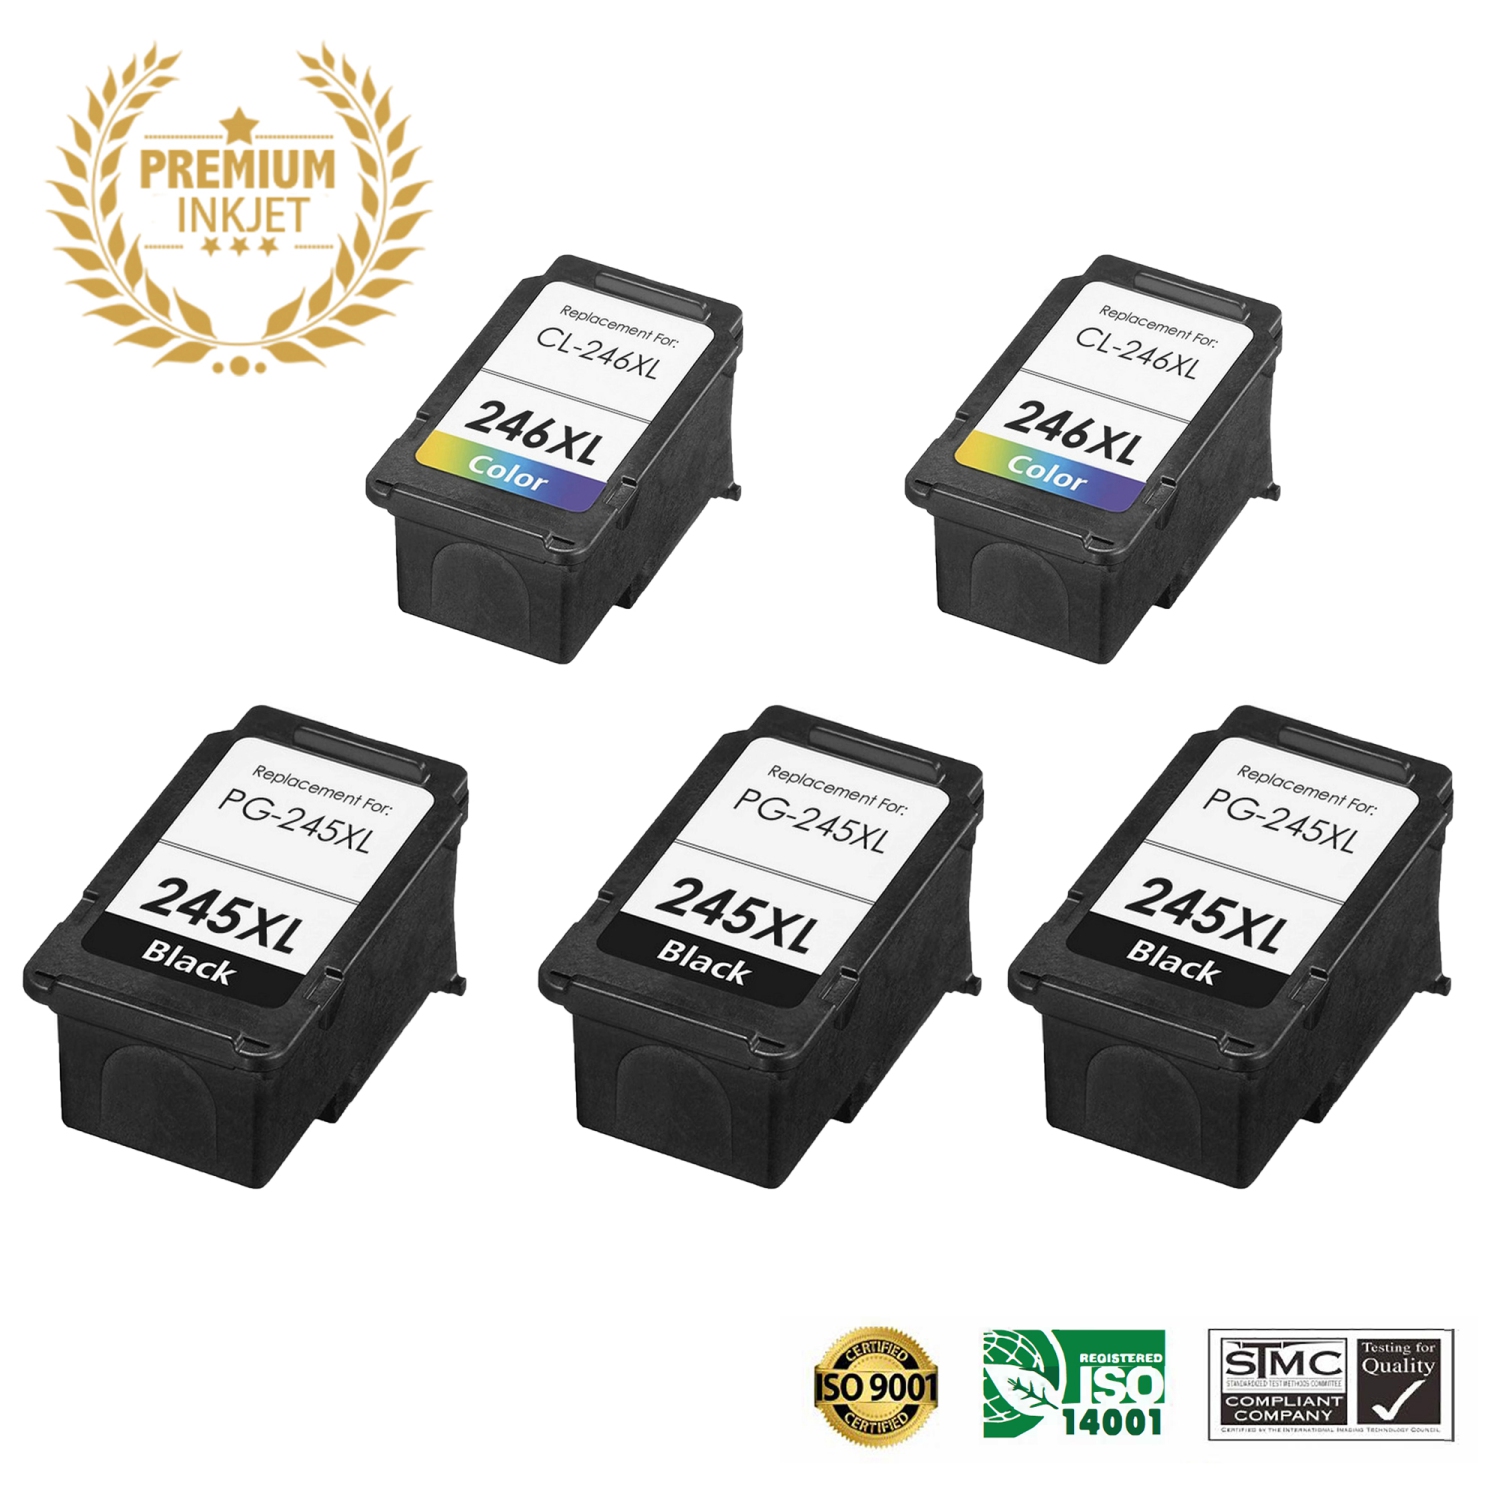 5 PACK Canon PG-245XL CL-246XL/PG245 CL246/canon 245 246 Remanufactured Ink Cartridge for Canon MG2520 TR4520 TR4500 TS302